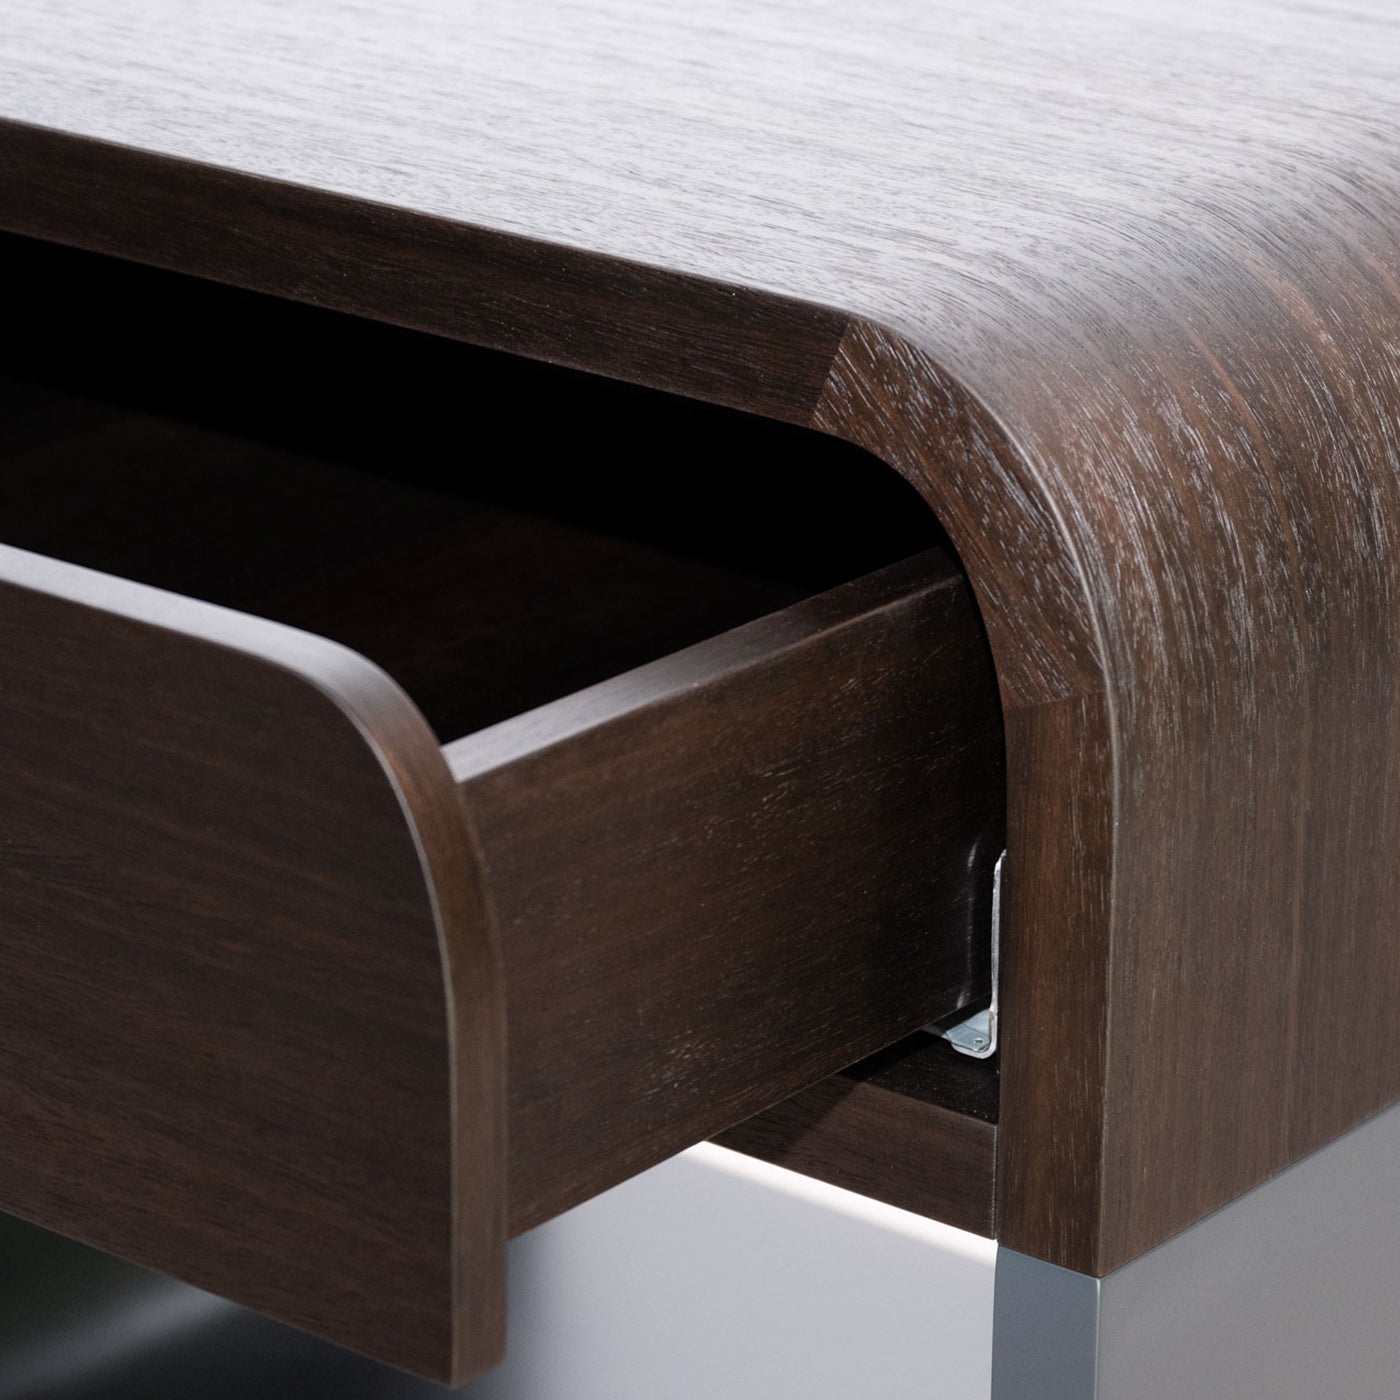 Tabaco Brown Nightstand  - Alternative view 4